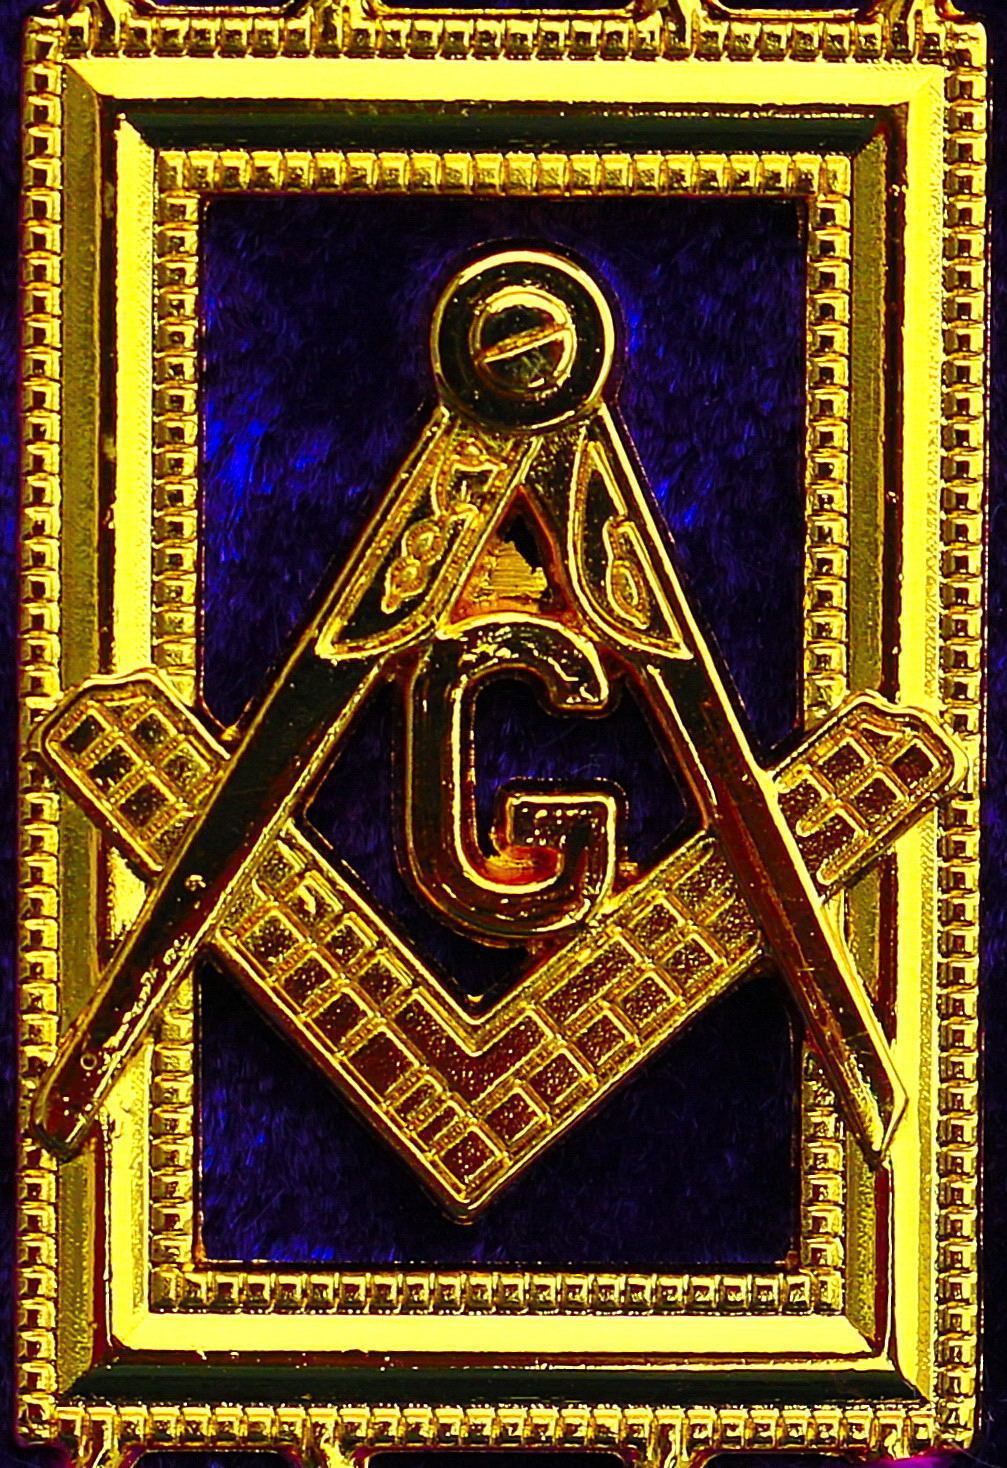 Grand Officers Blue Lodge Chain Collar - Gold Plated with Rhinestones - Bricks Masons